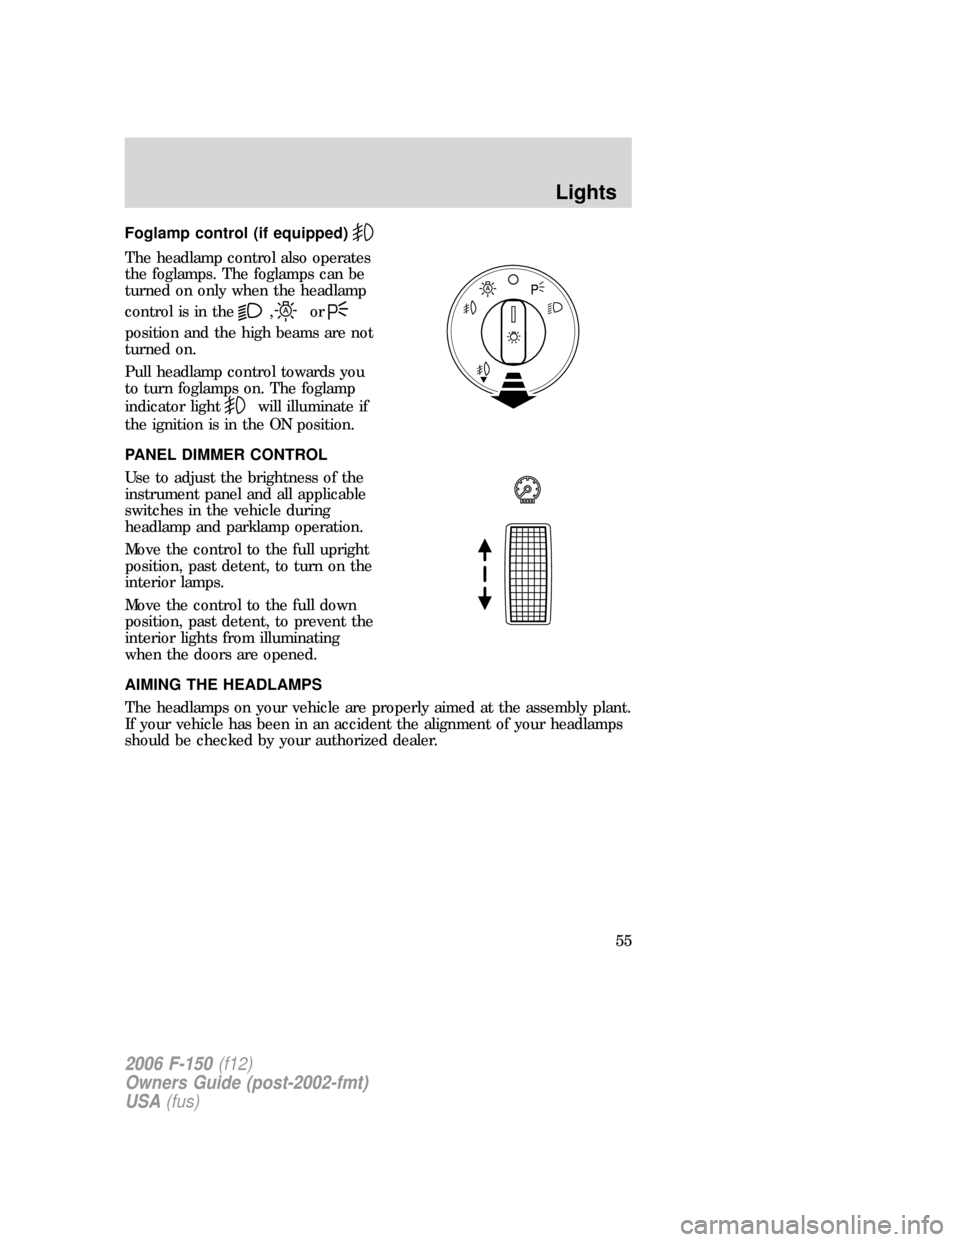 FORD F150 2006 11.G Owners Manual Foglamp control (if equipped)
The headlamp control also operates
the foglamps. The foglamps can be
turned on only when the headlamp
control is in the
,or
position and the high beams are not
turned on.